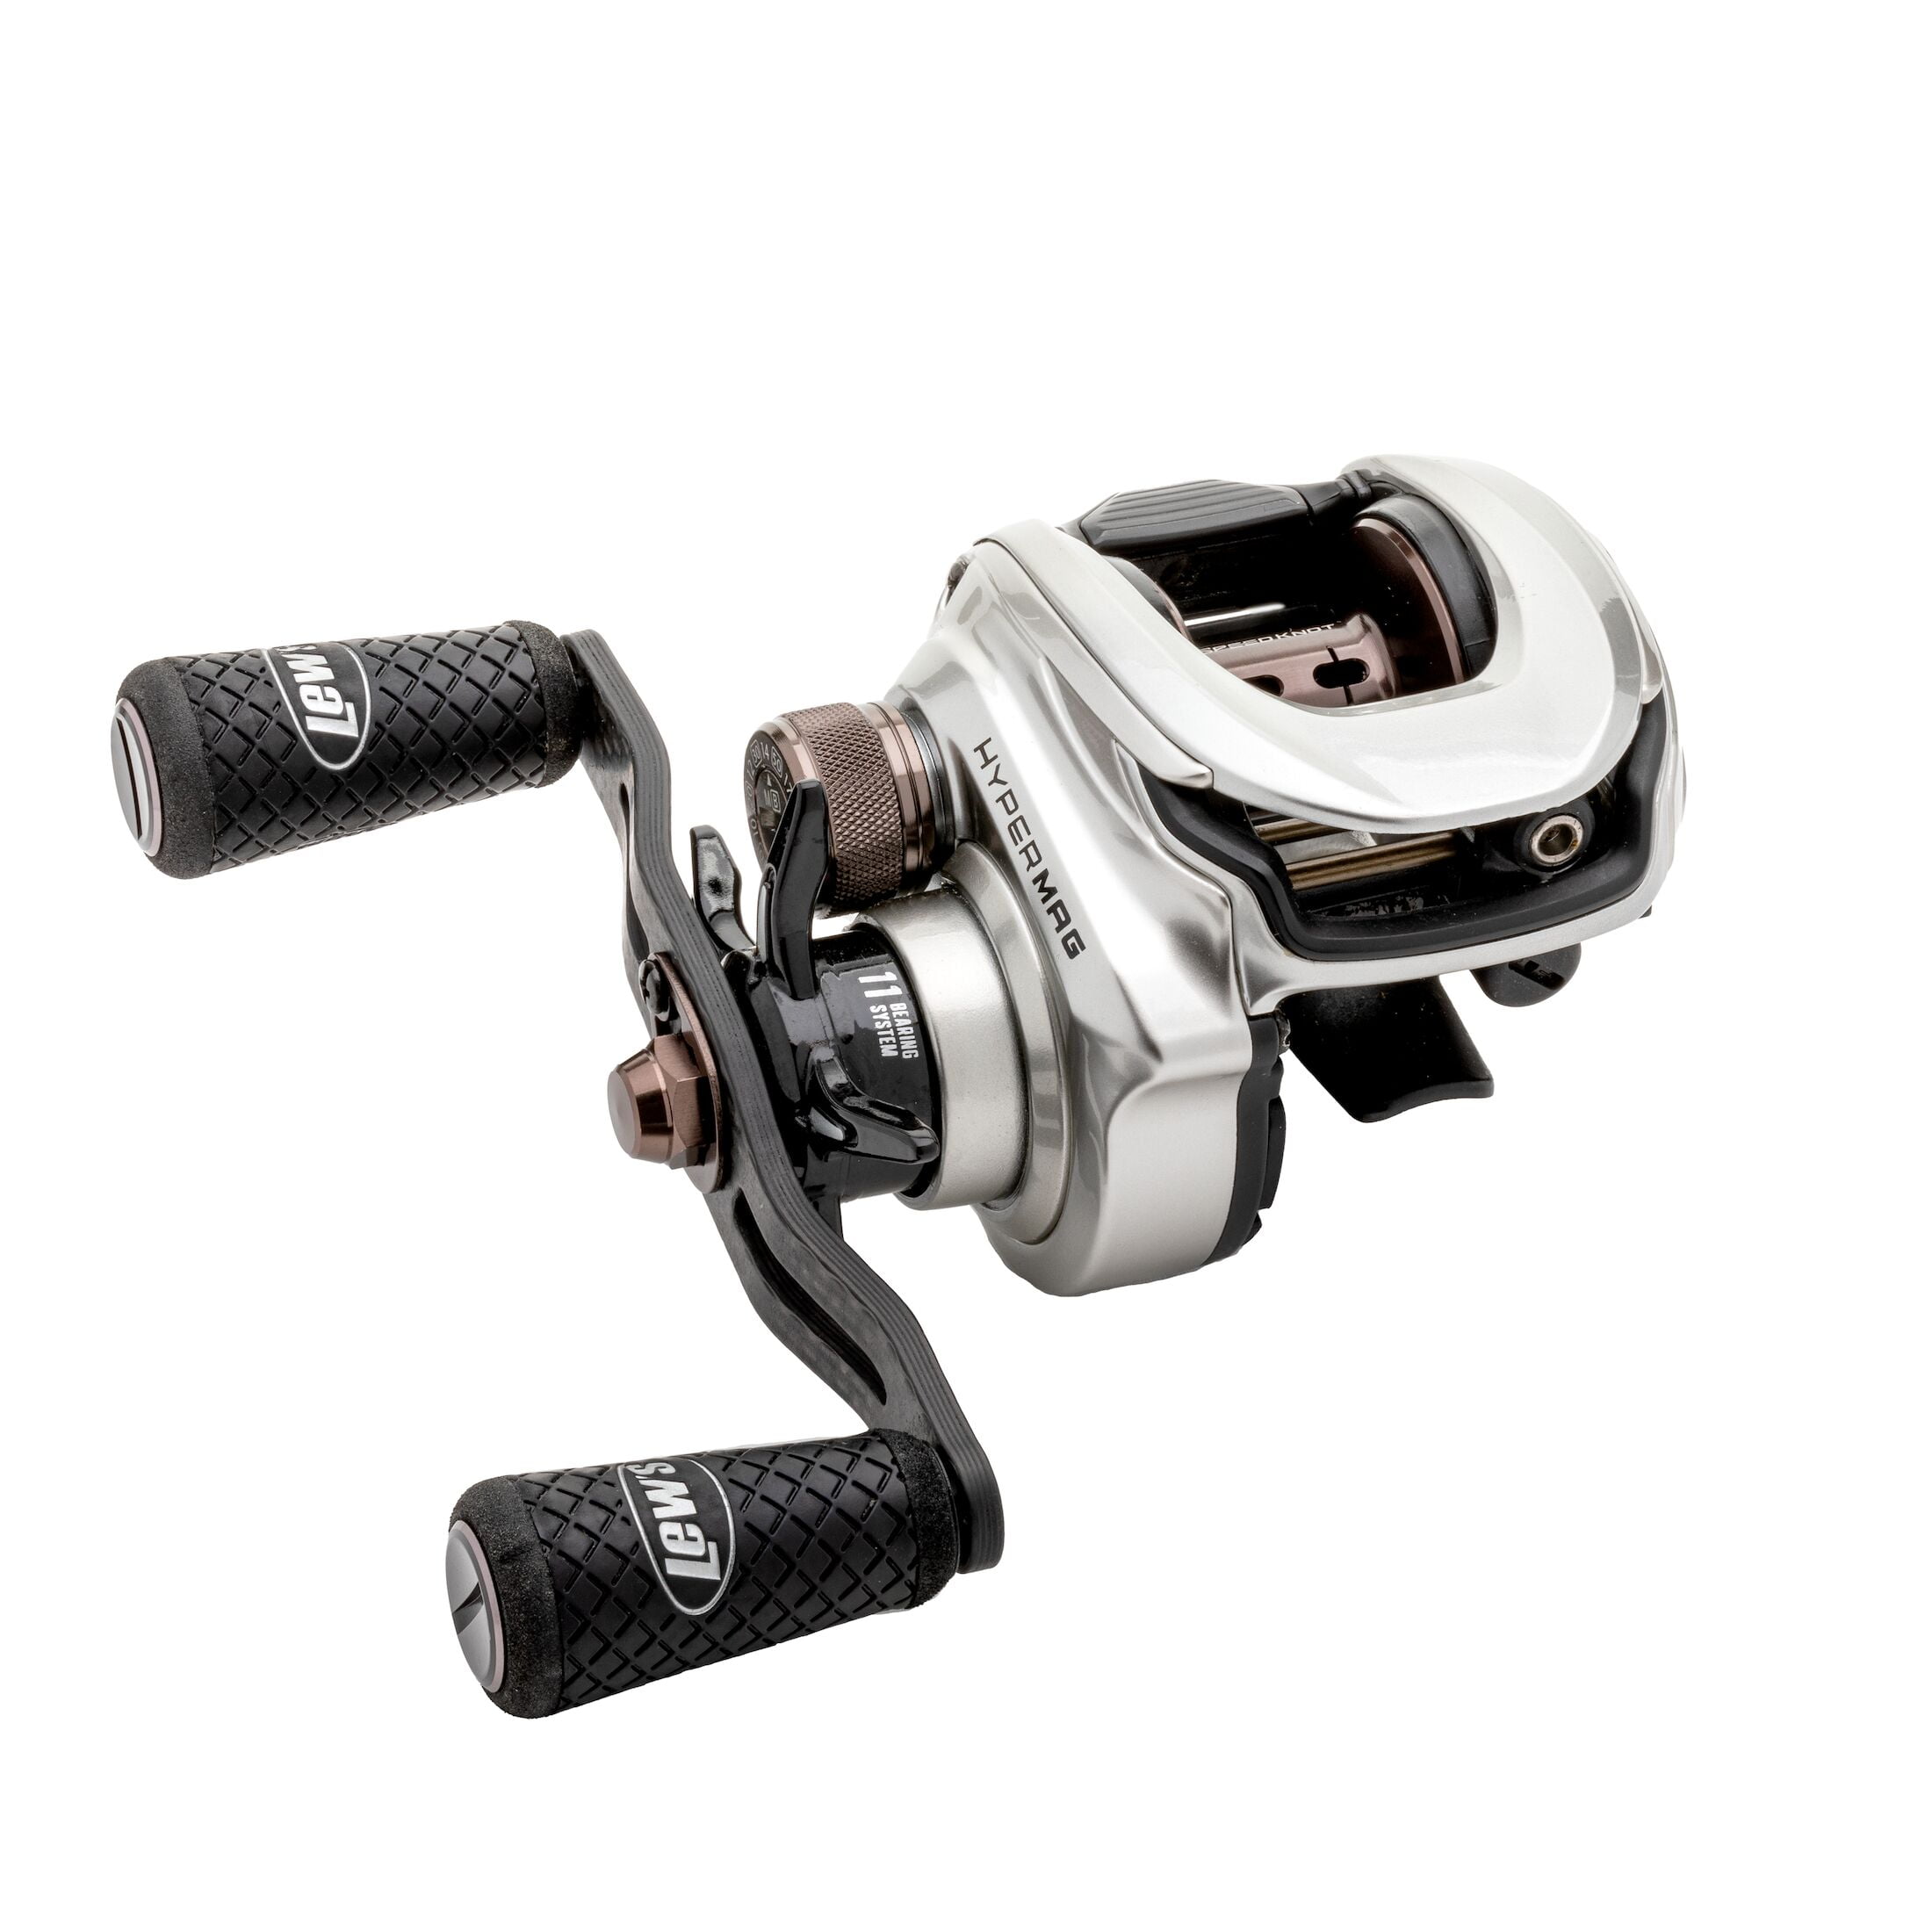 Lews Xfinity Bait Caster Reel Green and White